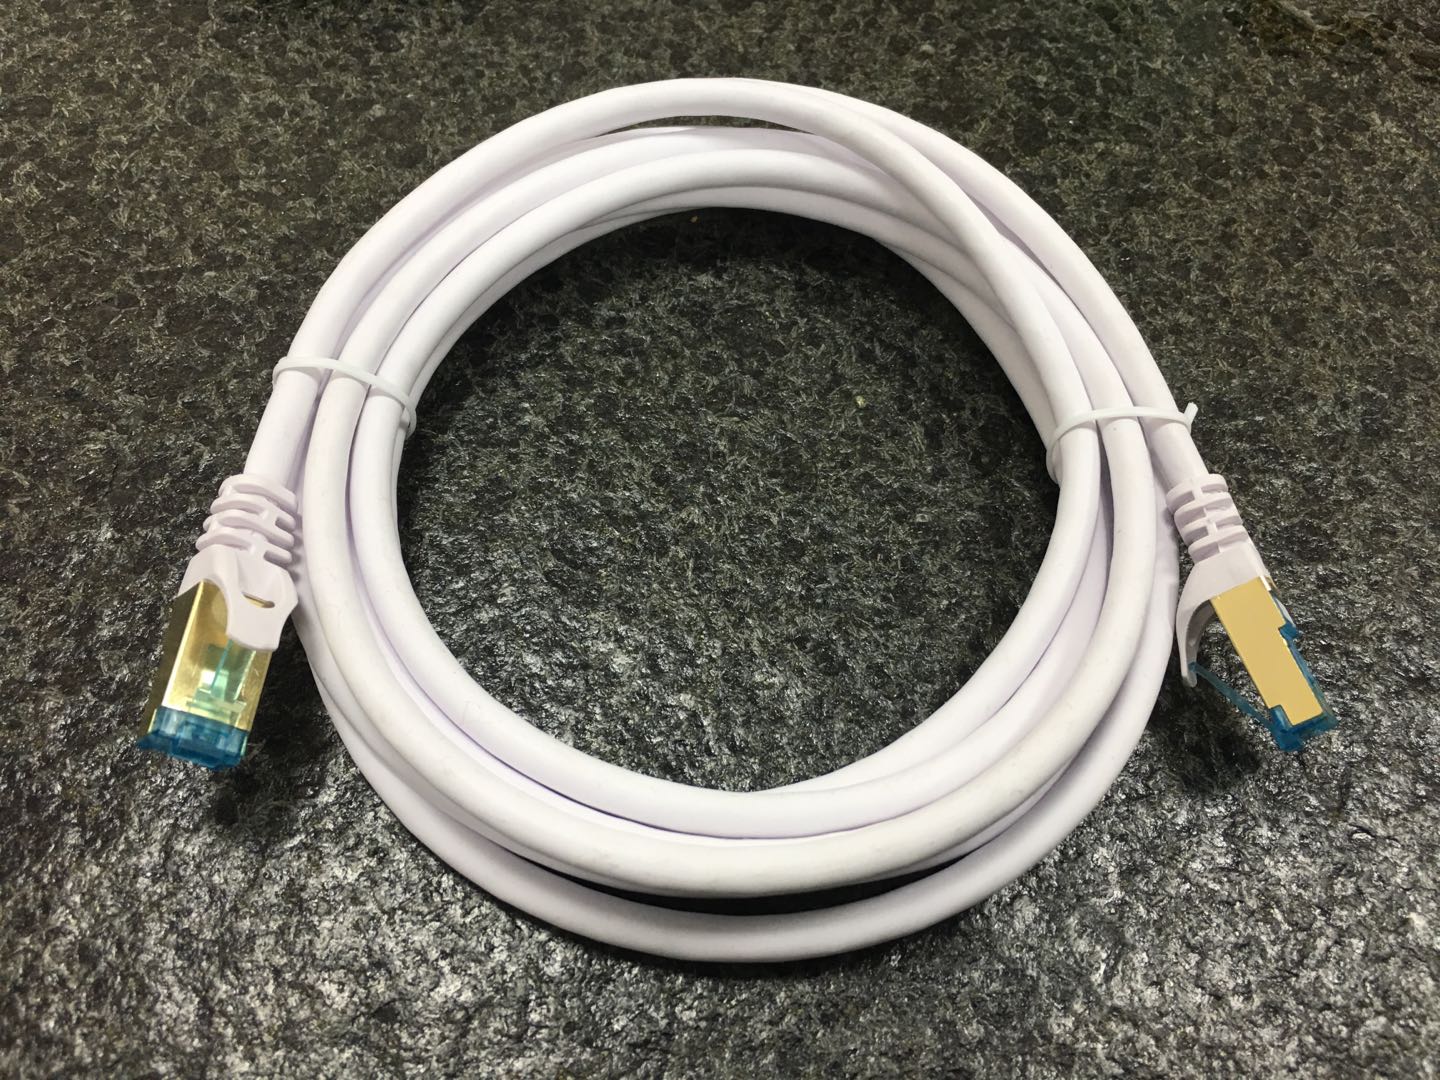 CAT UTP Network Cables